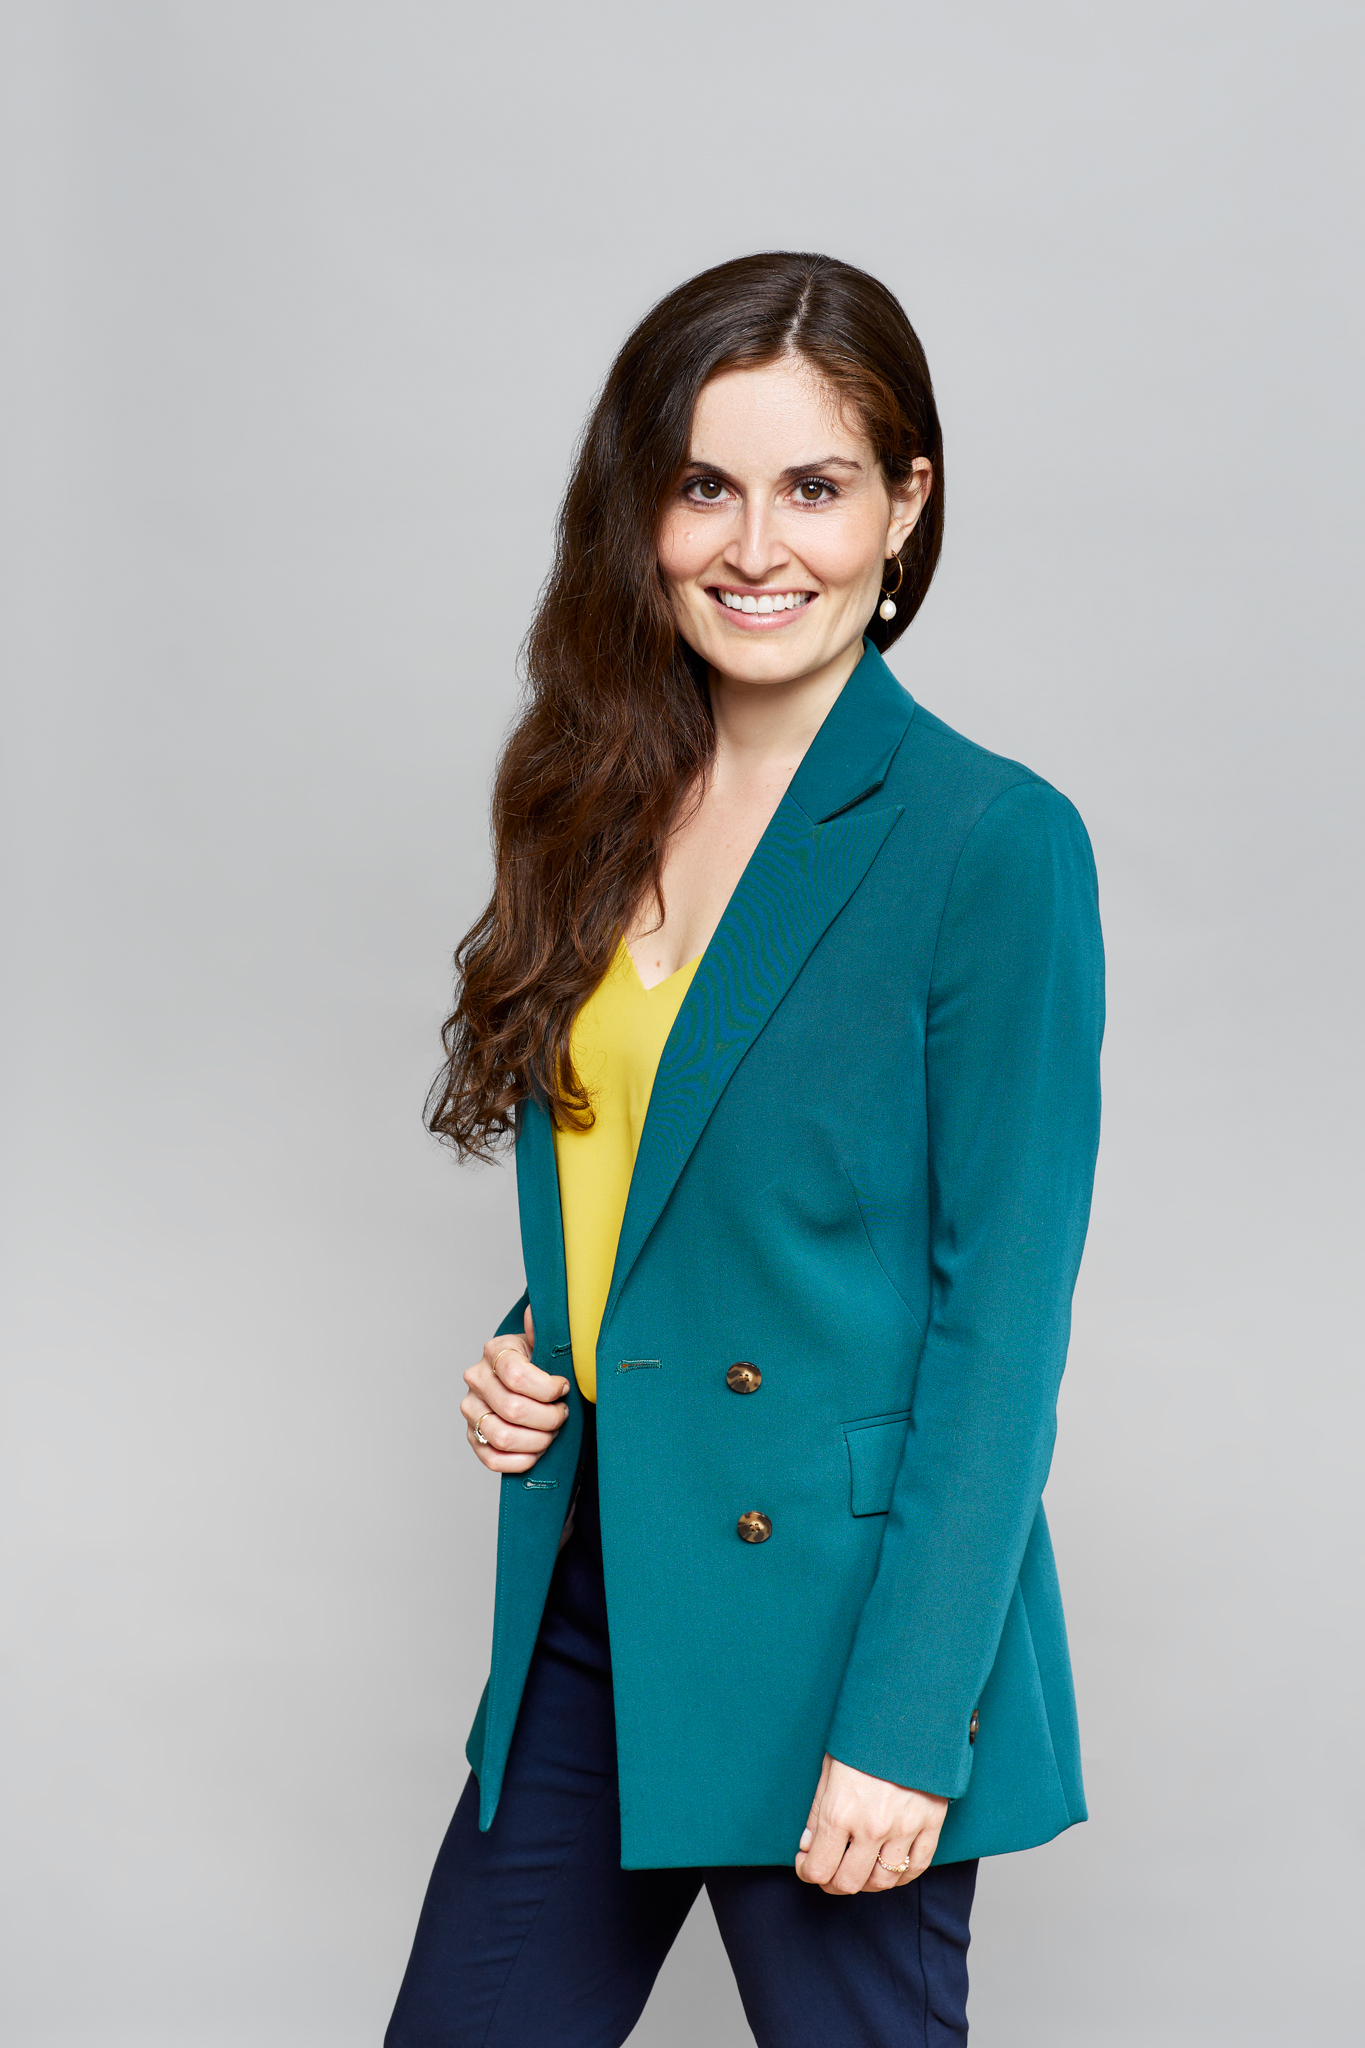 An event photographer captures a woman in a teal blazer in a posed photo.